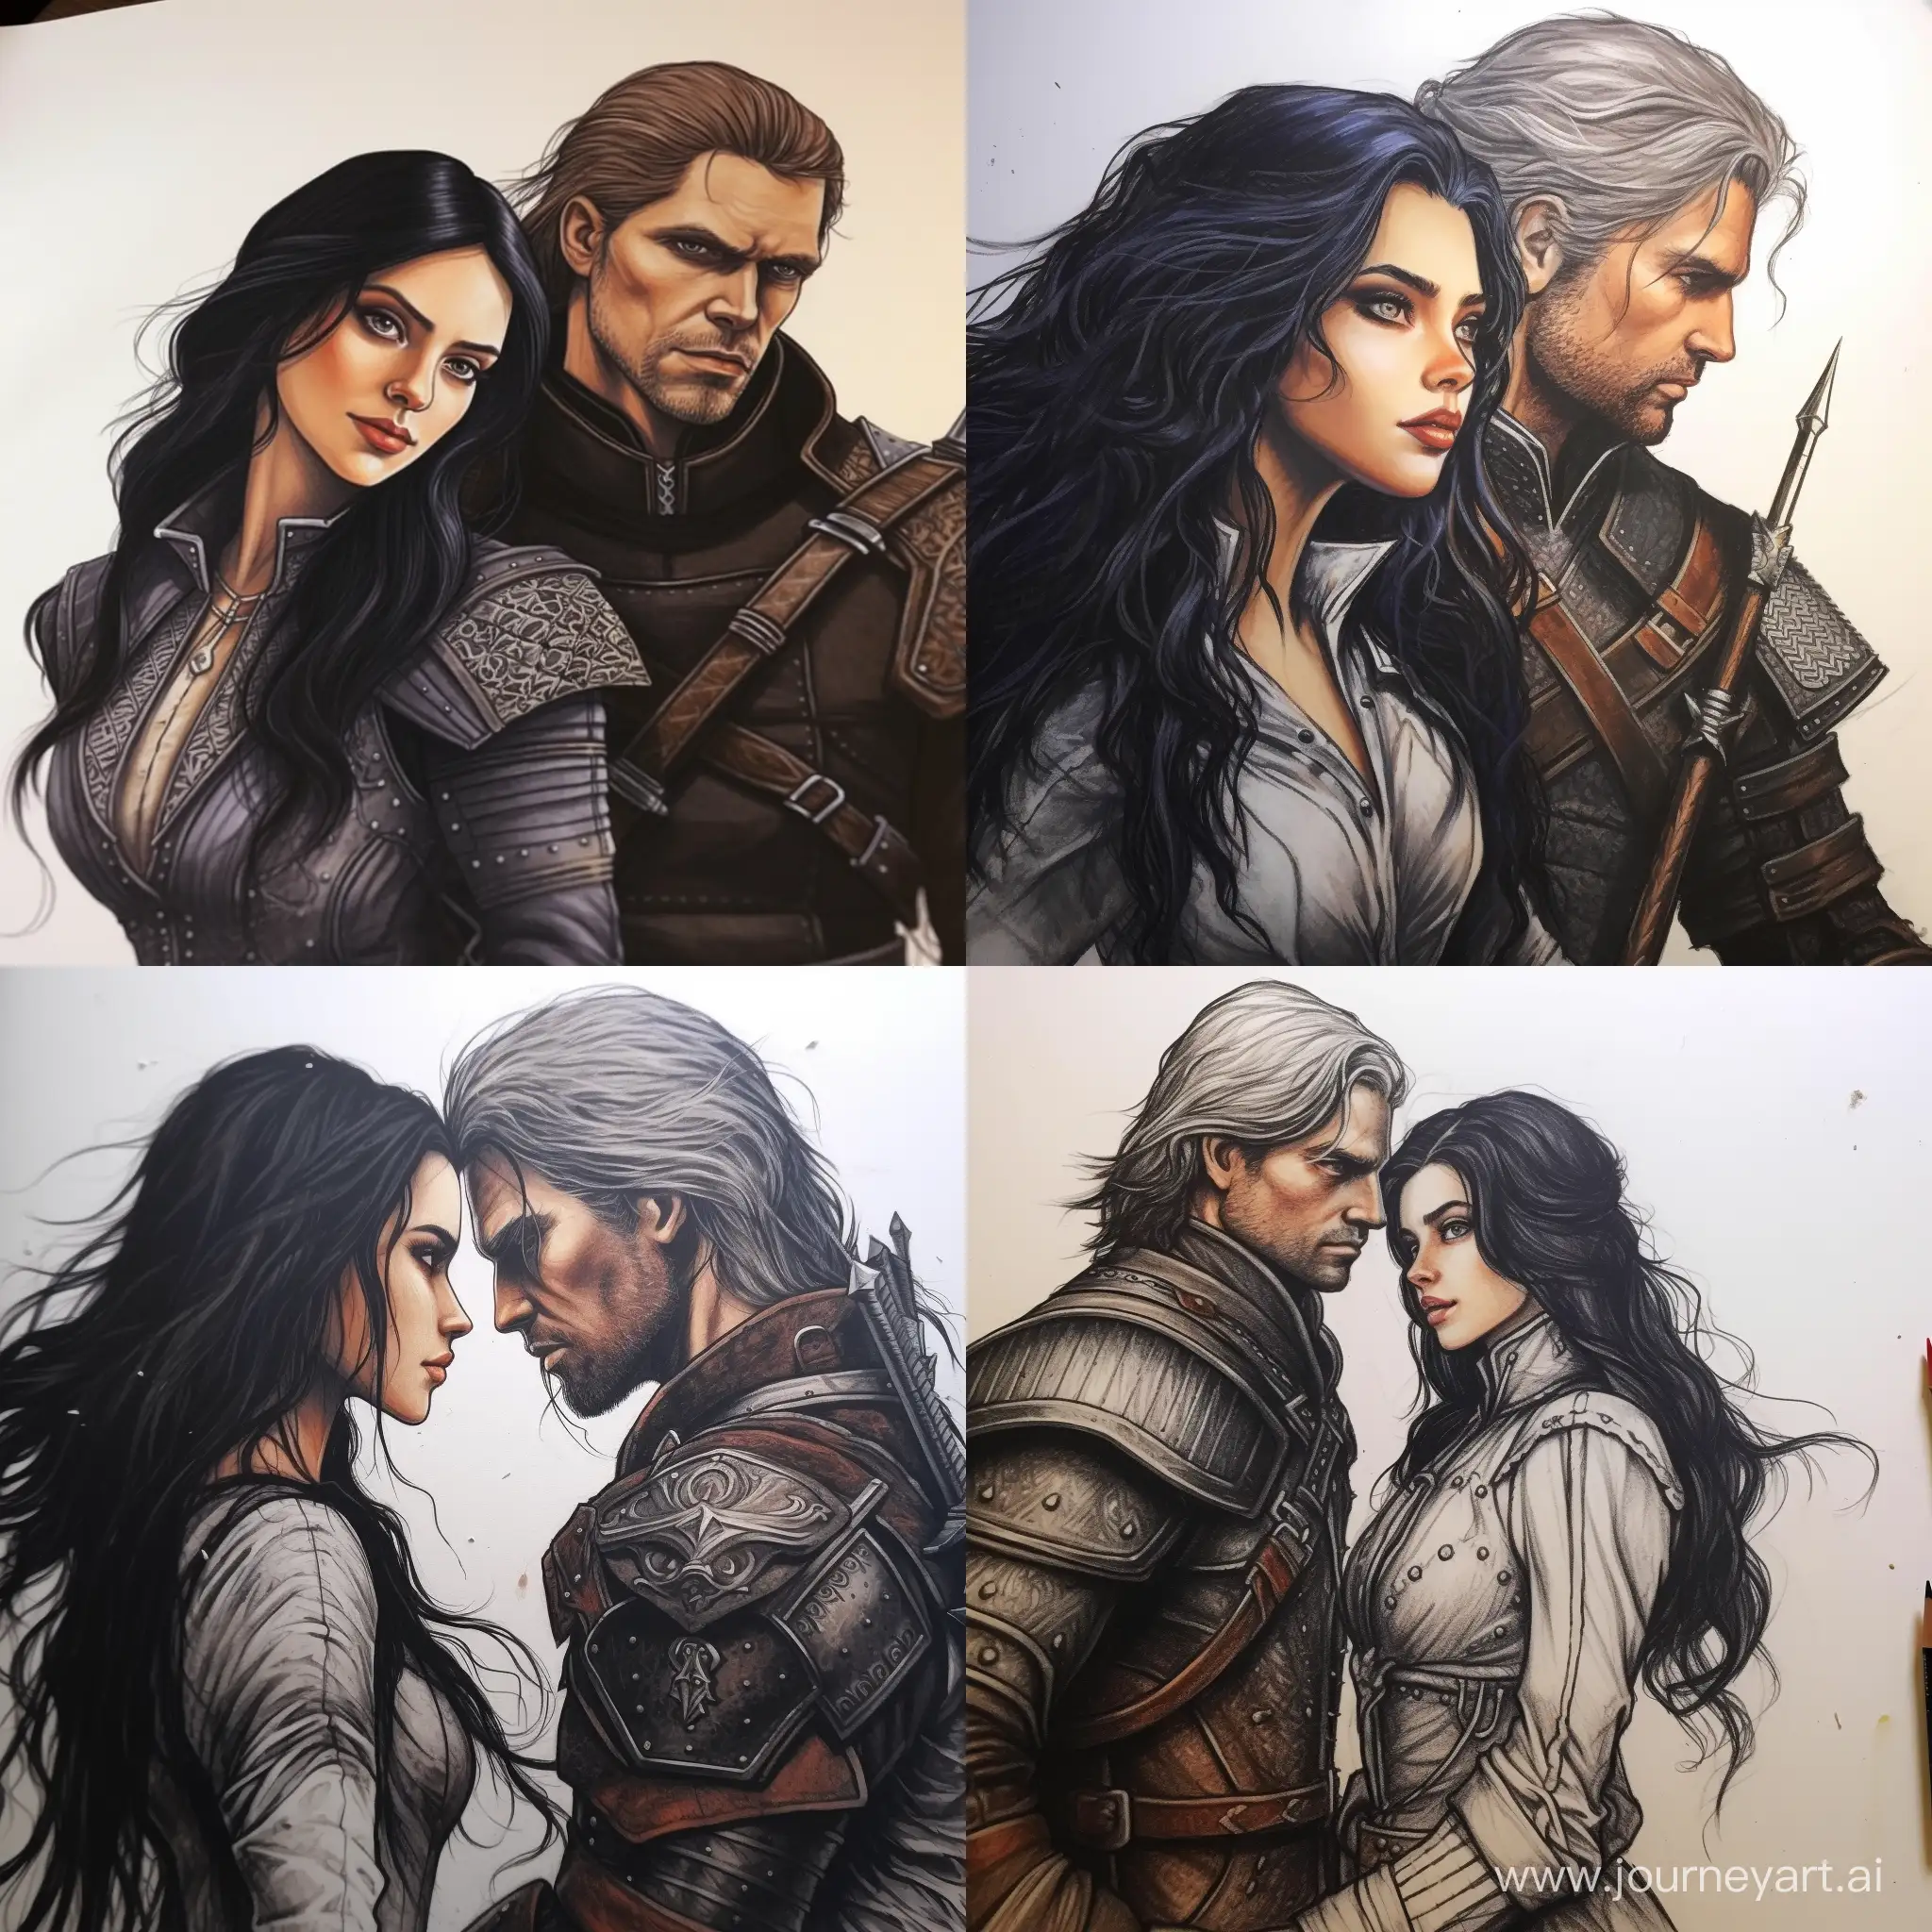 Epic-Battle-Geralt-of-Rivia-and-Yennefer-portrayed-by-Charlie-Hunnam-and-Eva-Green